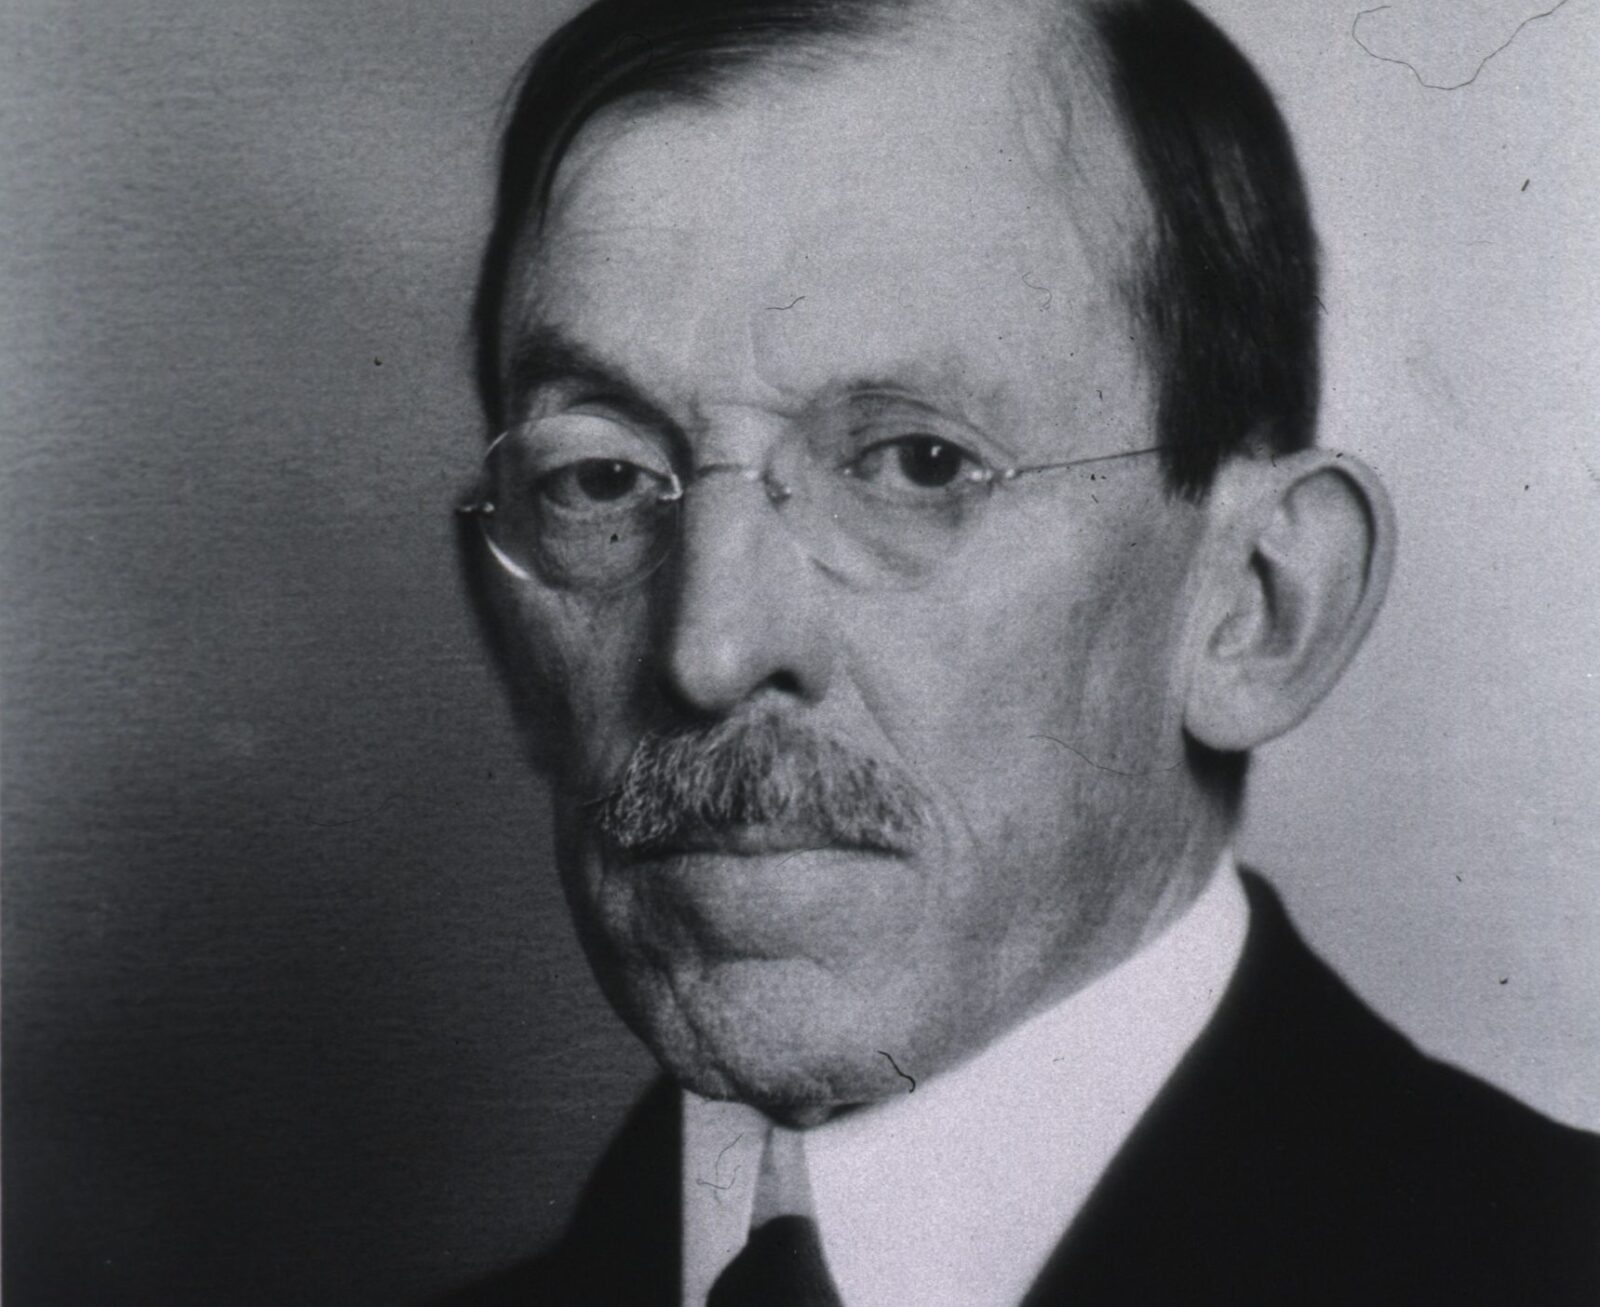 Black and white photo of an older man with a receding hairline, mustache, rimless glasses, and a serious expression marked by a raised eyebrow